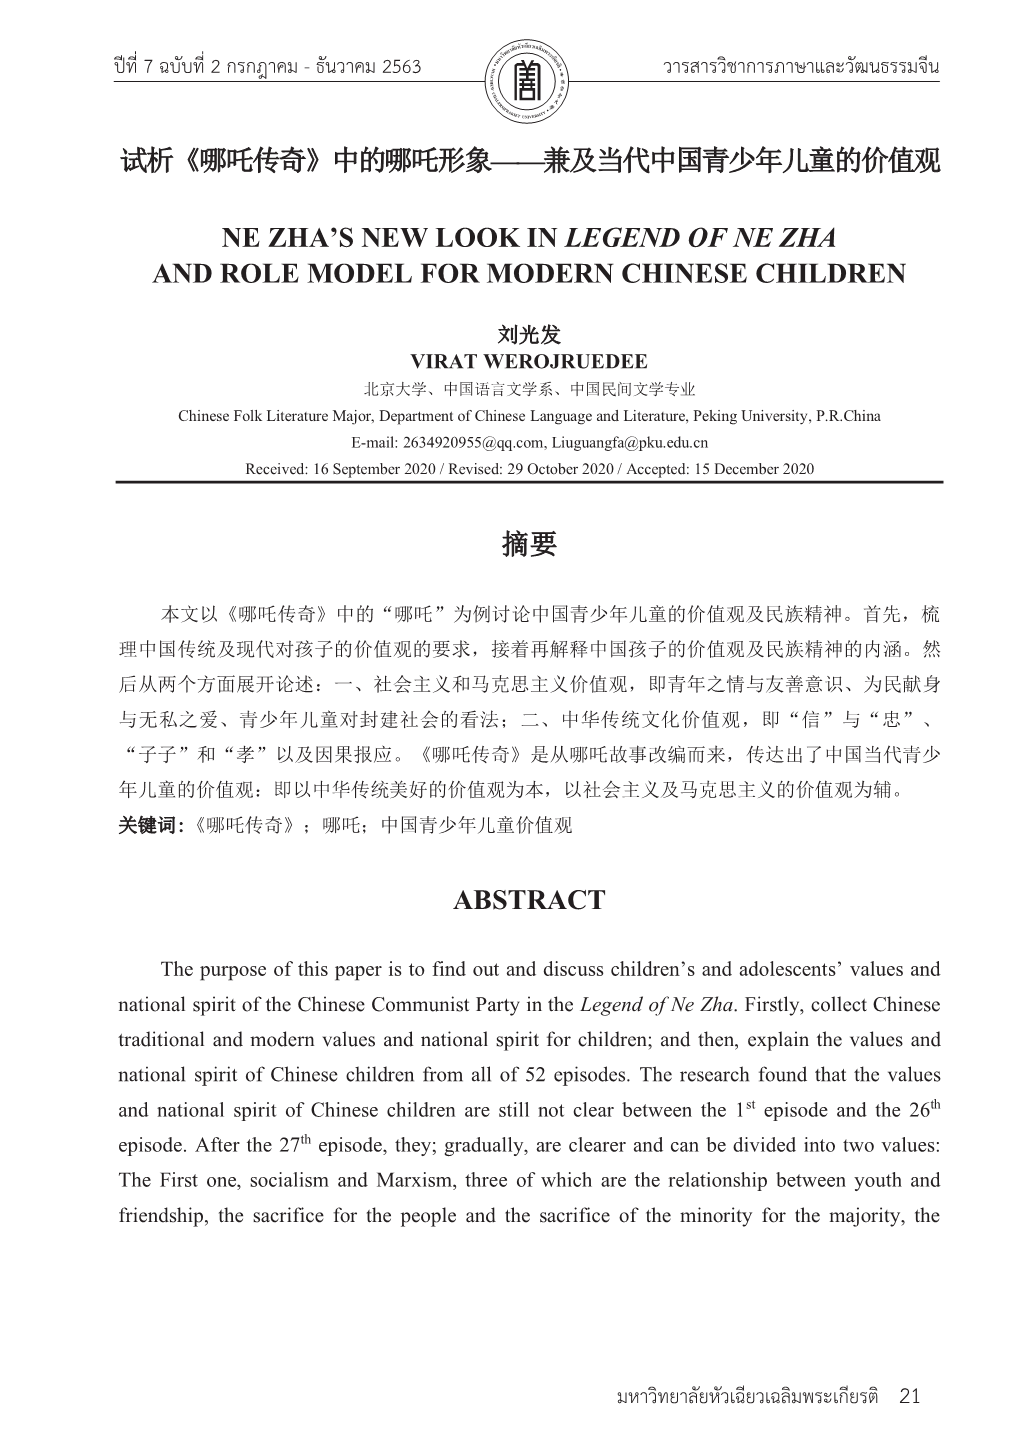 Ne Zha's New Look in Legend of Ne Zha and Role Model for Modern Chinese Children Abstract